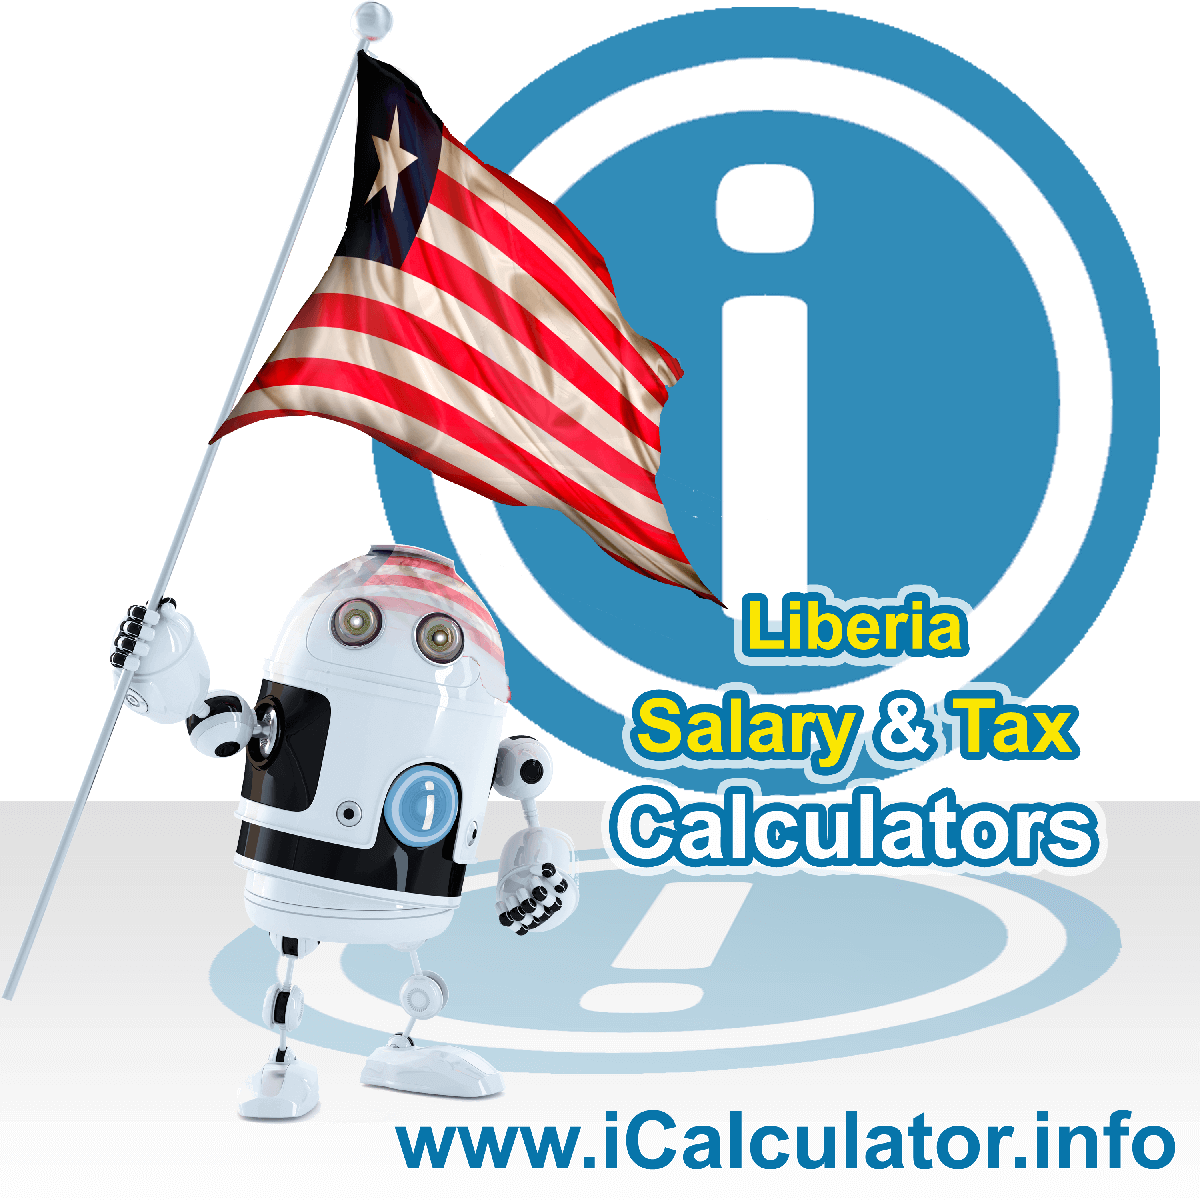 Liberia Tax Calculator. This image shows the Liberia flag and information relating to the tax formula for the Liberia Salary Calculator